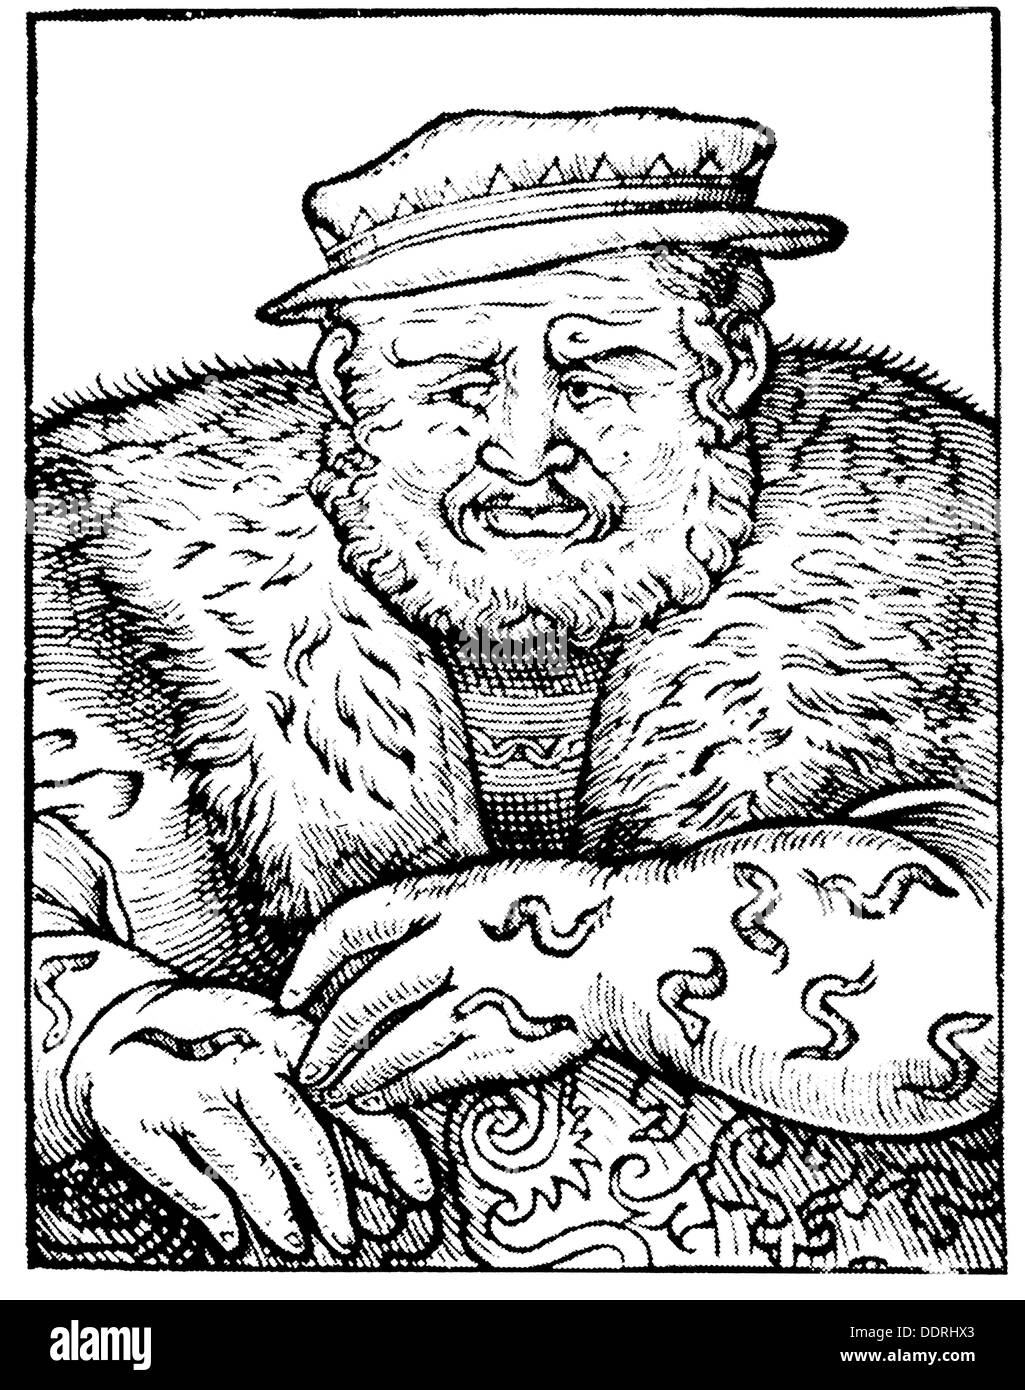 medicine, treatment, examination / therapy / consultation, therapy with leeches, woodcut, 16th century, 16th century, graphic, graphics, half length, hat, hats, beard, beards, fur collar, fur, furs, collar, collars, arm, arms, animal, animals, leech, leeches, blood, suck, sucking, patient, patients, medicine, medicines, treatment, treatments, examination, examinations, examining, therapy, therapies, woodcut, woodcuts, historic, historical, man, men, male, people, NOT, Additional-Rights-Clearences-Not Available Stock Photo